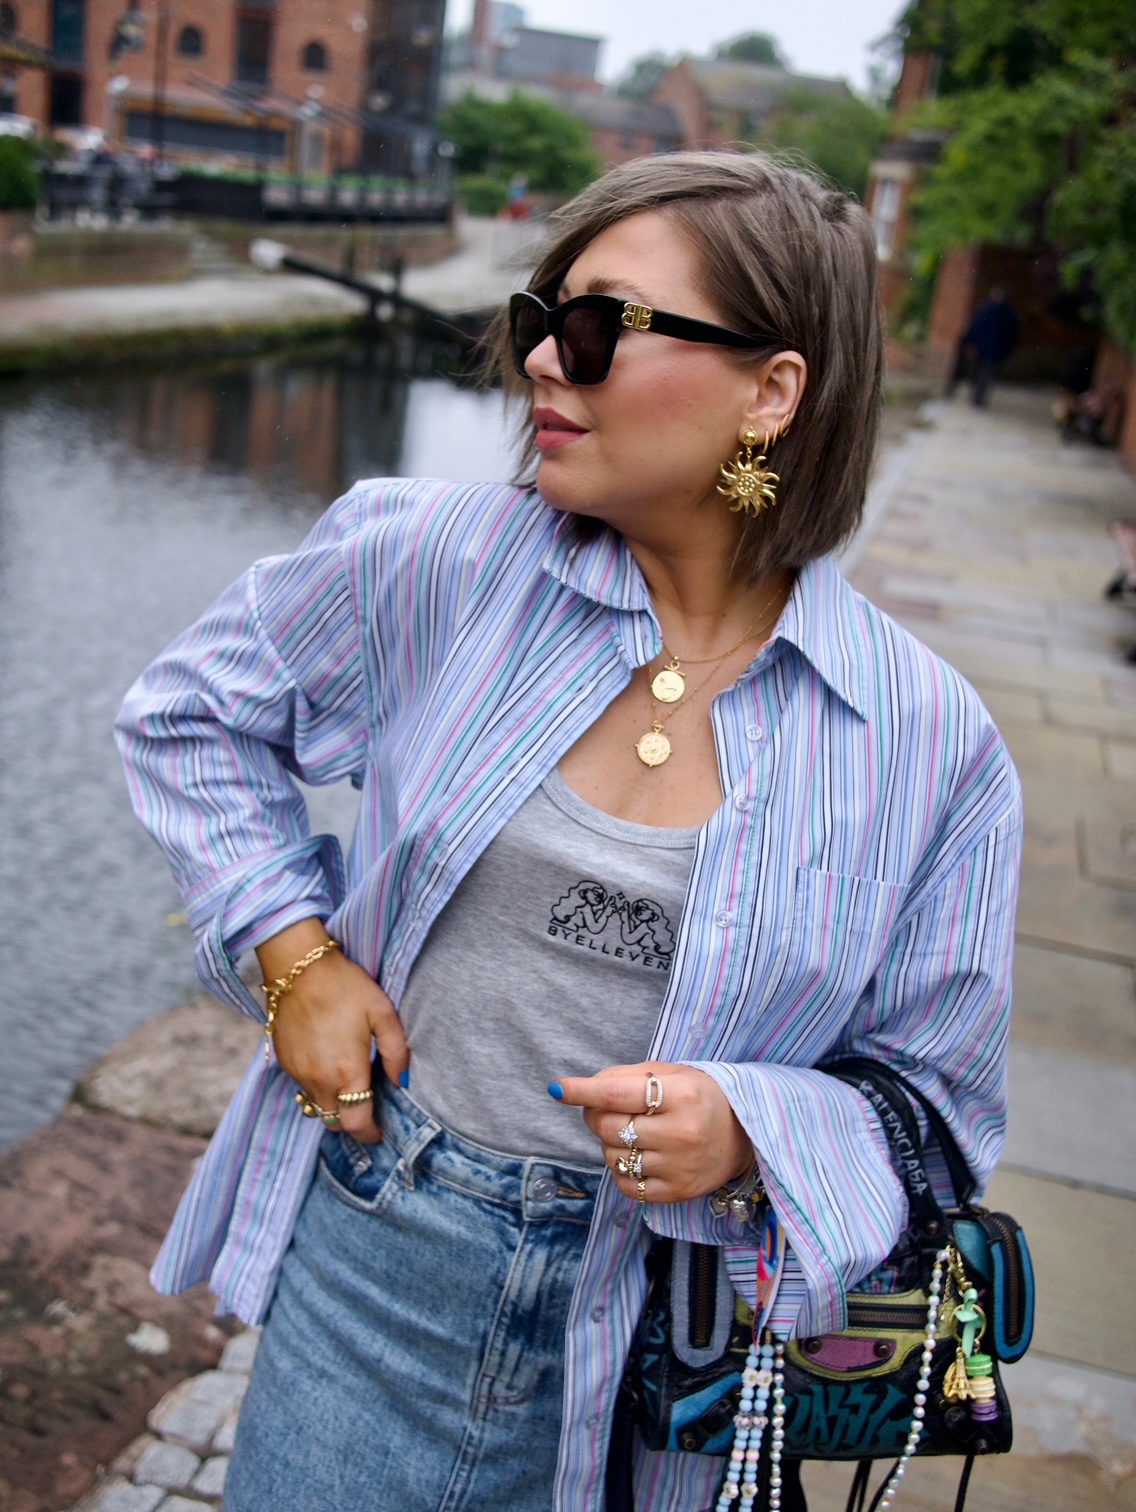 manchester fashion influencer,Influencer,fashion summer outfits. summer dresses, summer accessories ,ootd,